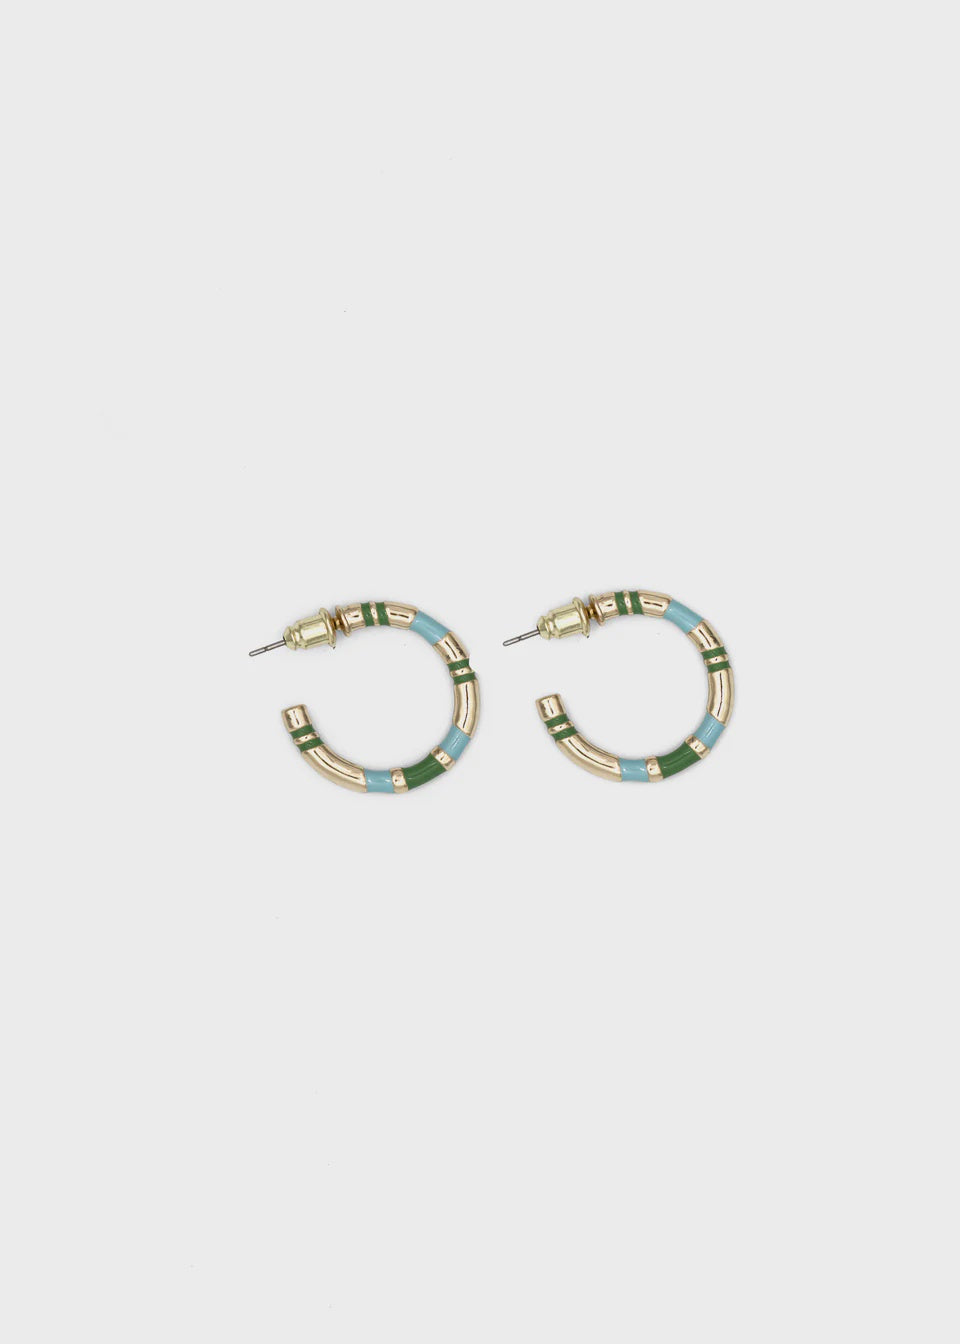 Cassydie Earrings - Turquoise